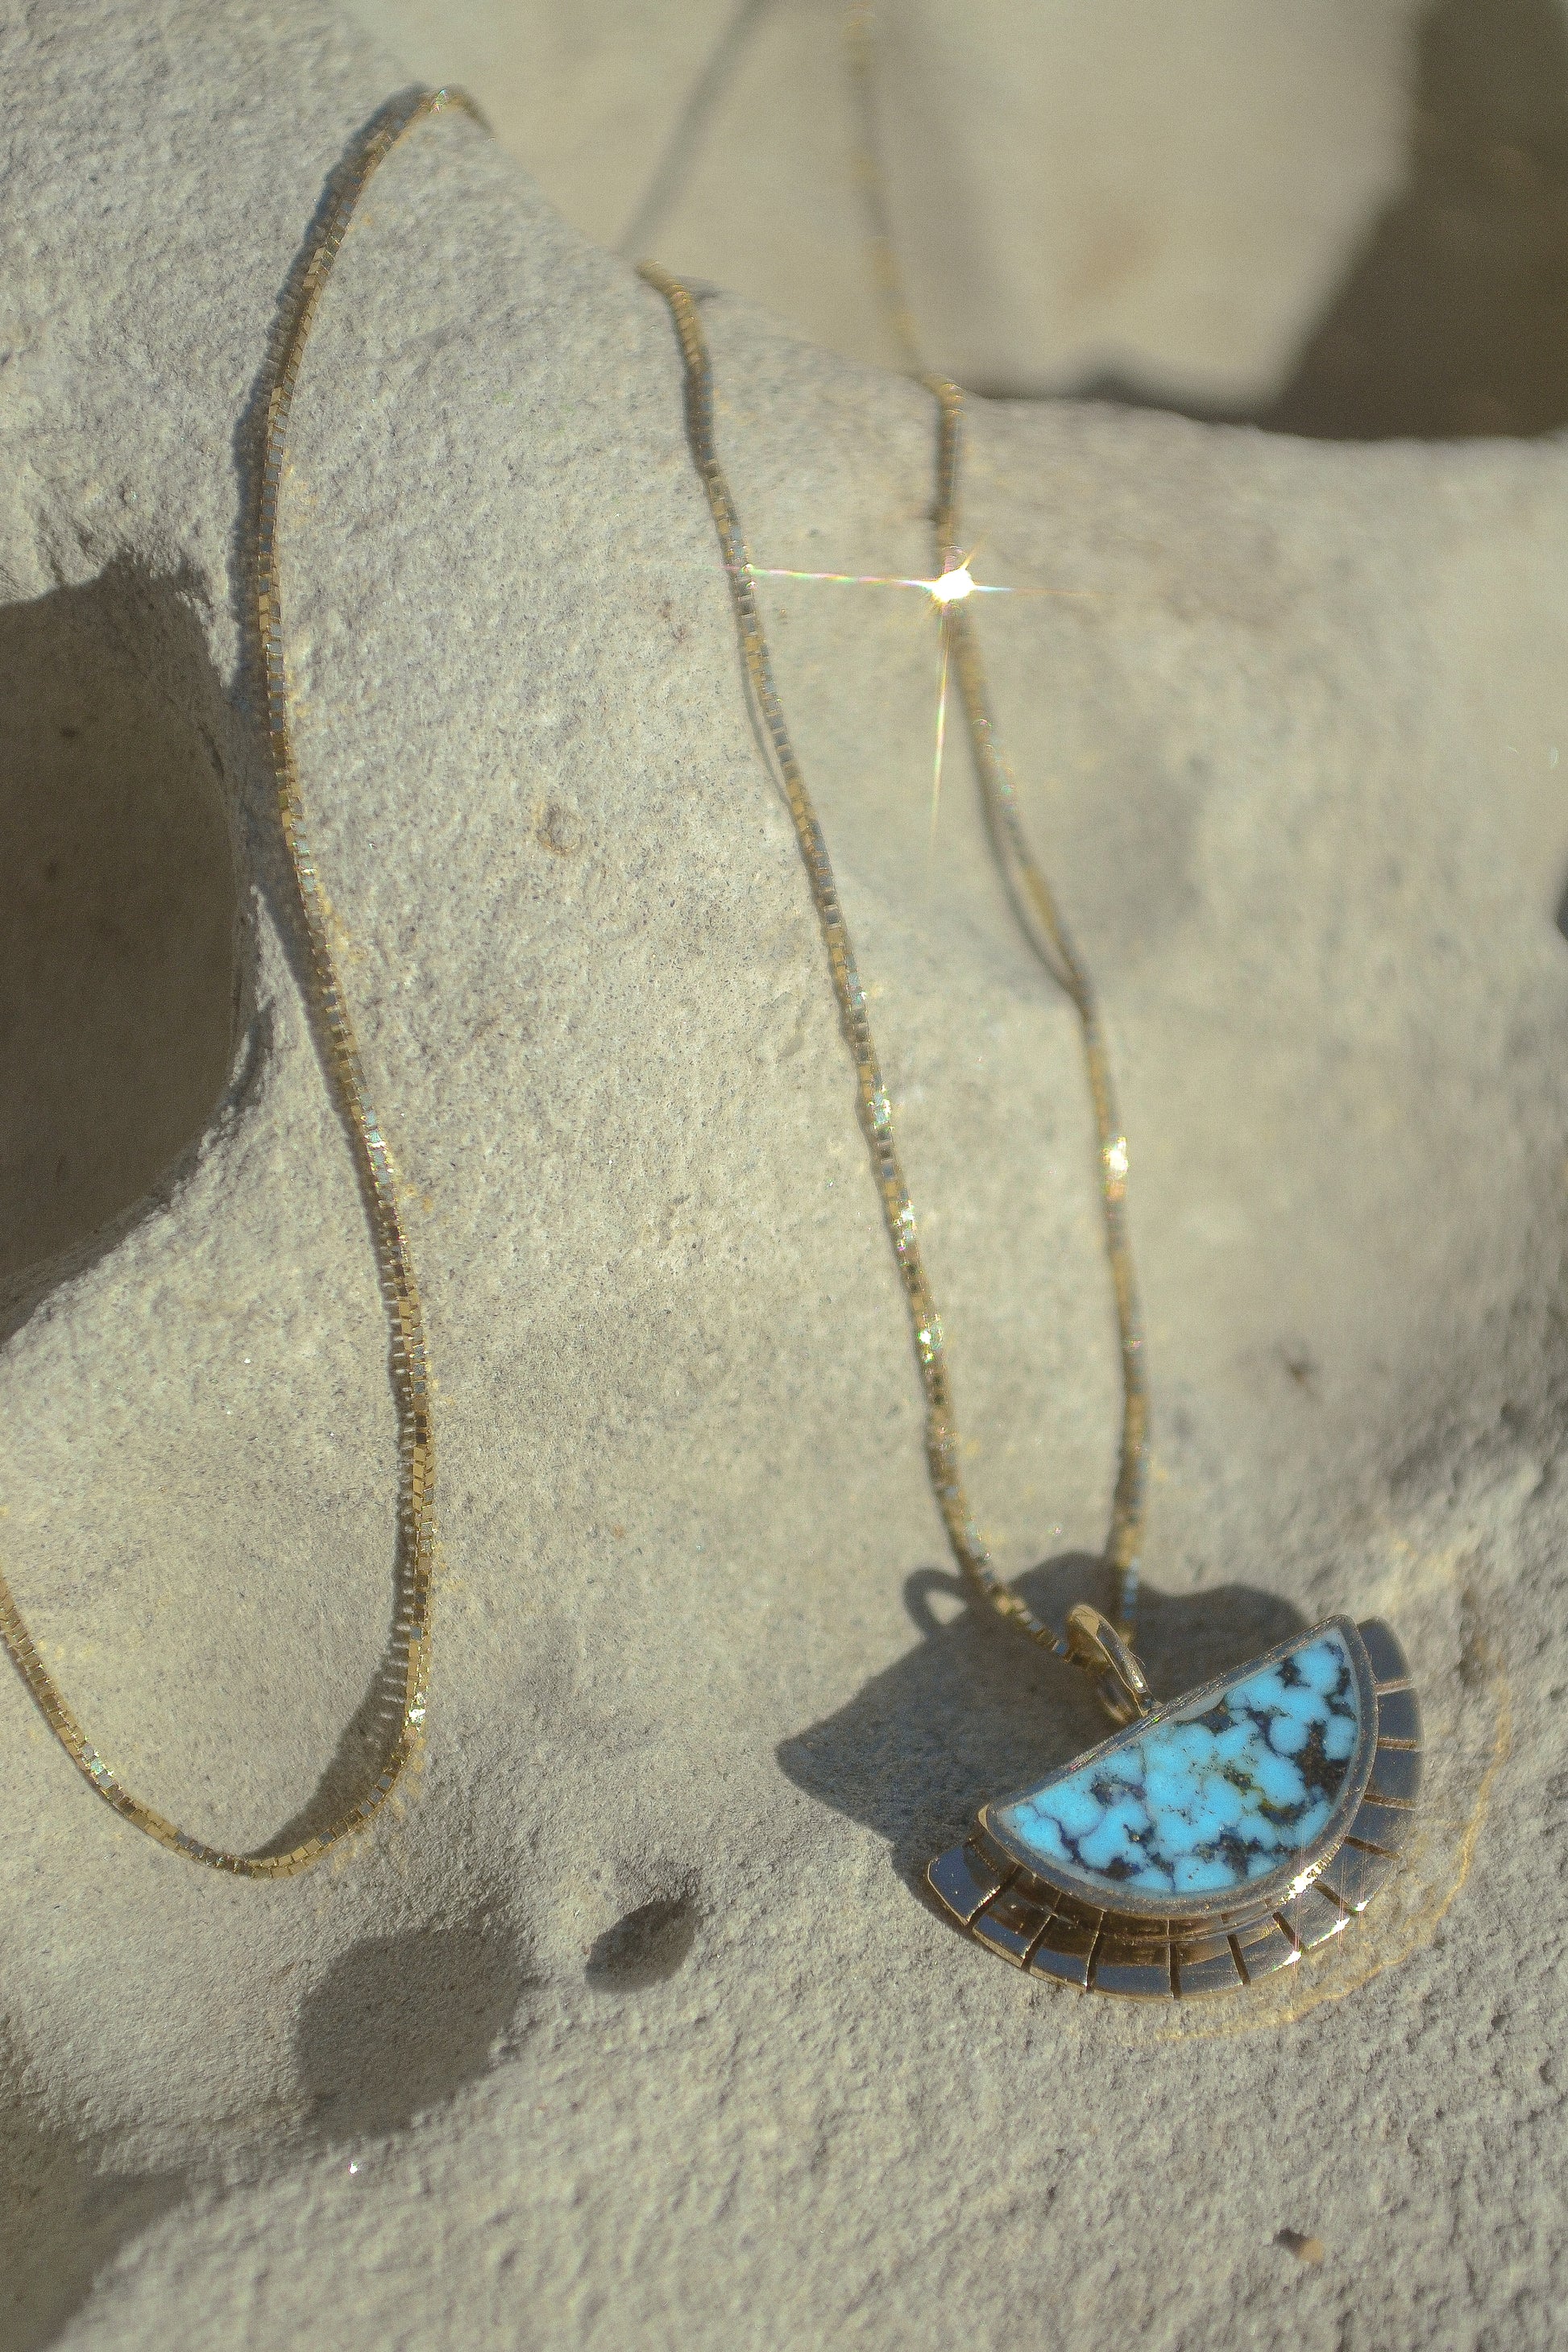 A half circle of warm 14k yellow gold is wrapped around an inlaid Kingman turquoise stone while a serrated halo of light radiates from this sun. This pendant hangs freely on a 14k yellow gold box chain. Handmade in the Rocky Mountains.